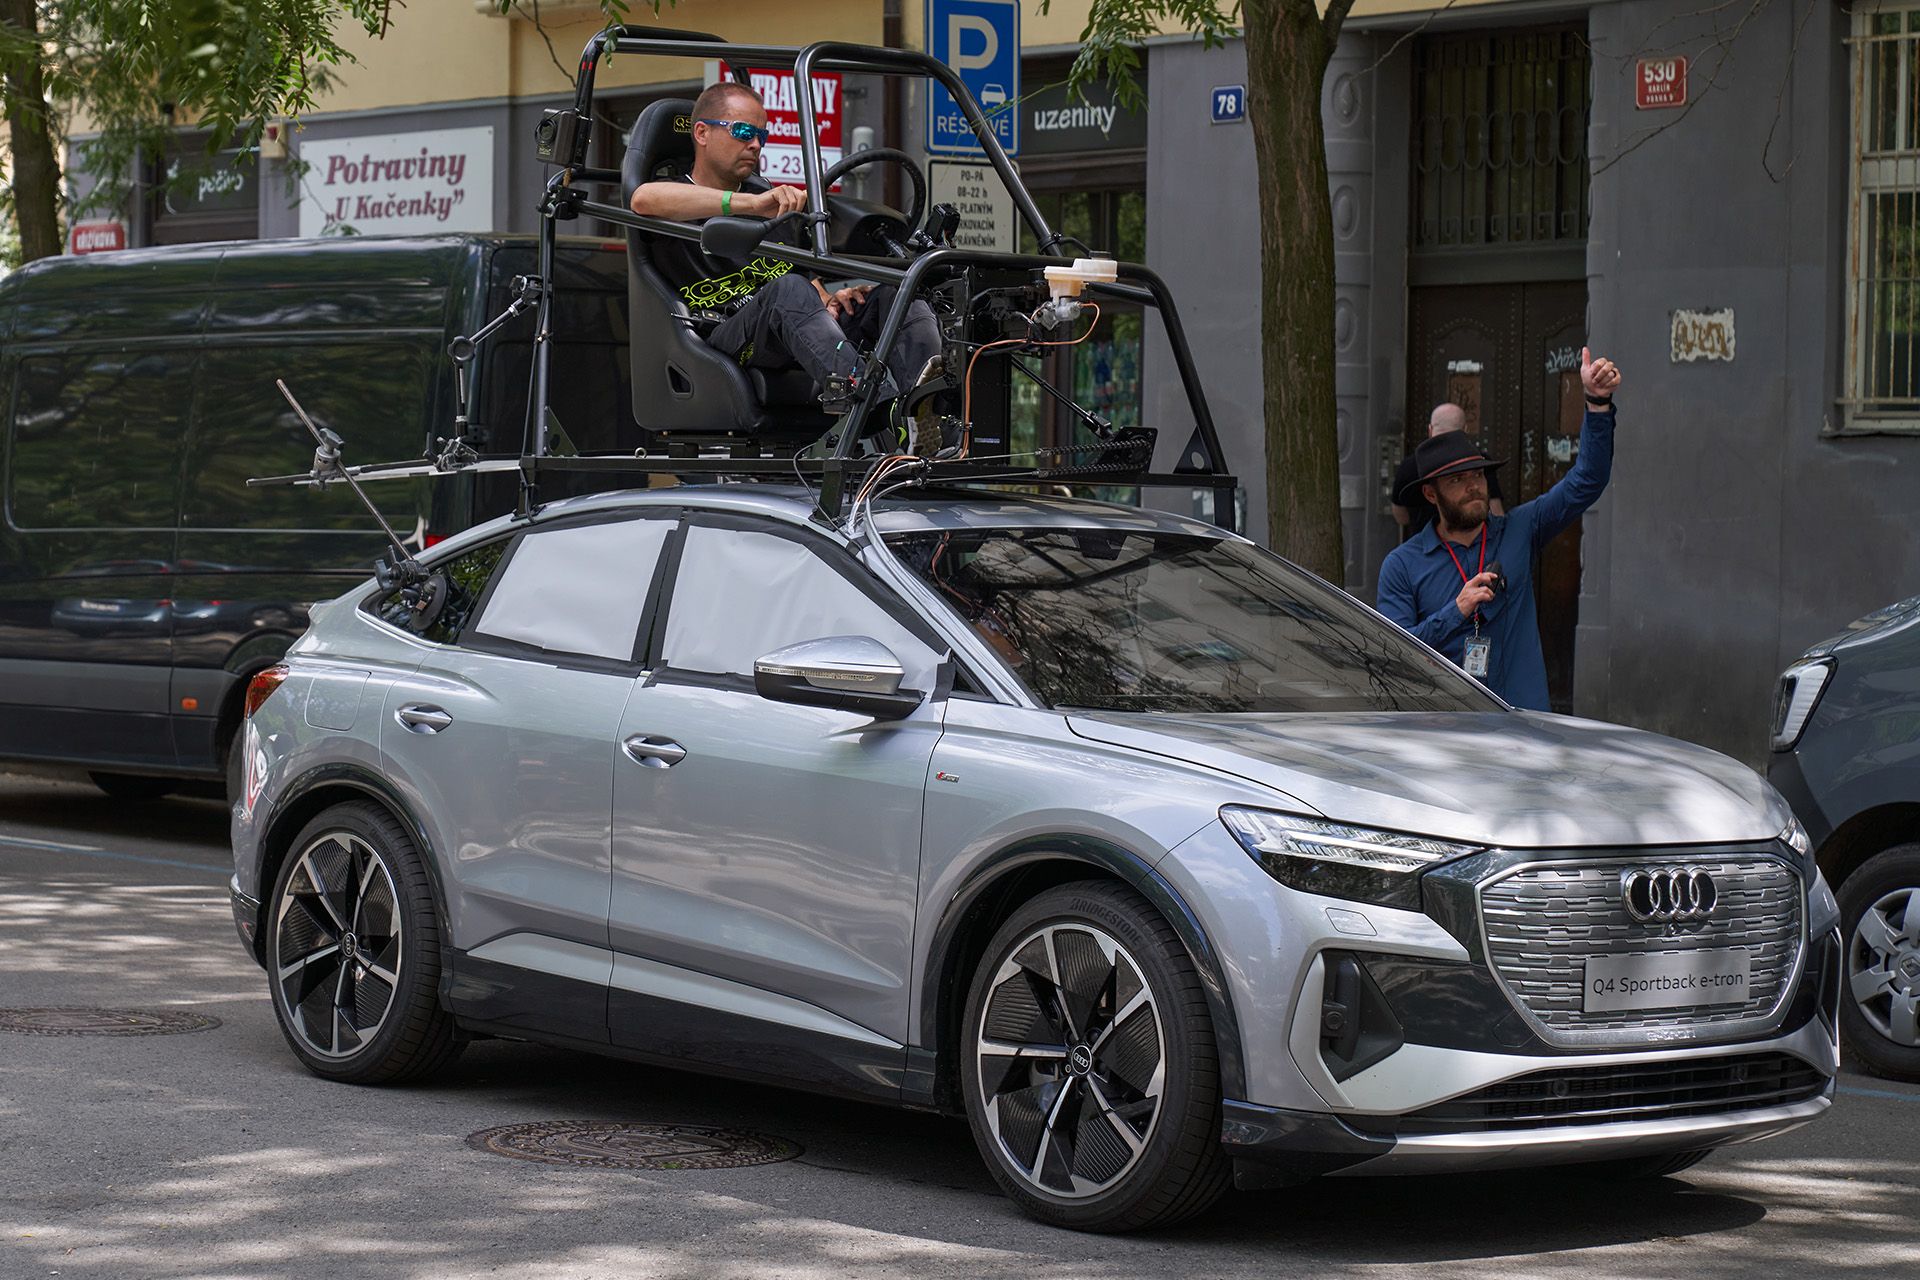 The Audi Q4 e-tron Sportback waits on set for the scene to be shot. A stunt driver can be seen sitting on the roof in the so-called pod car rig.